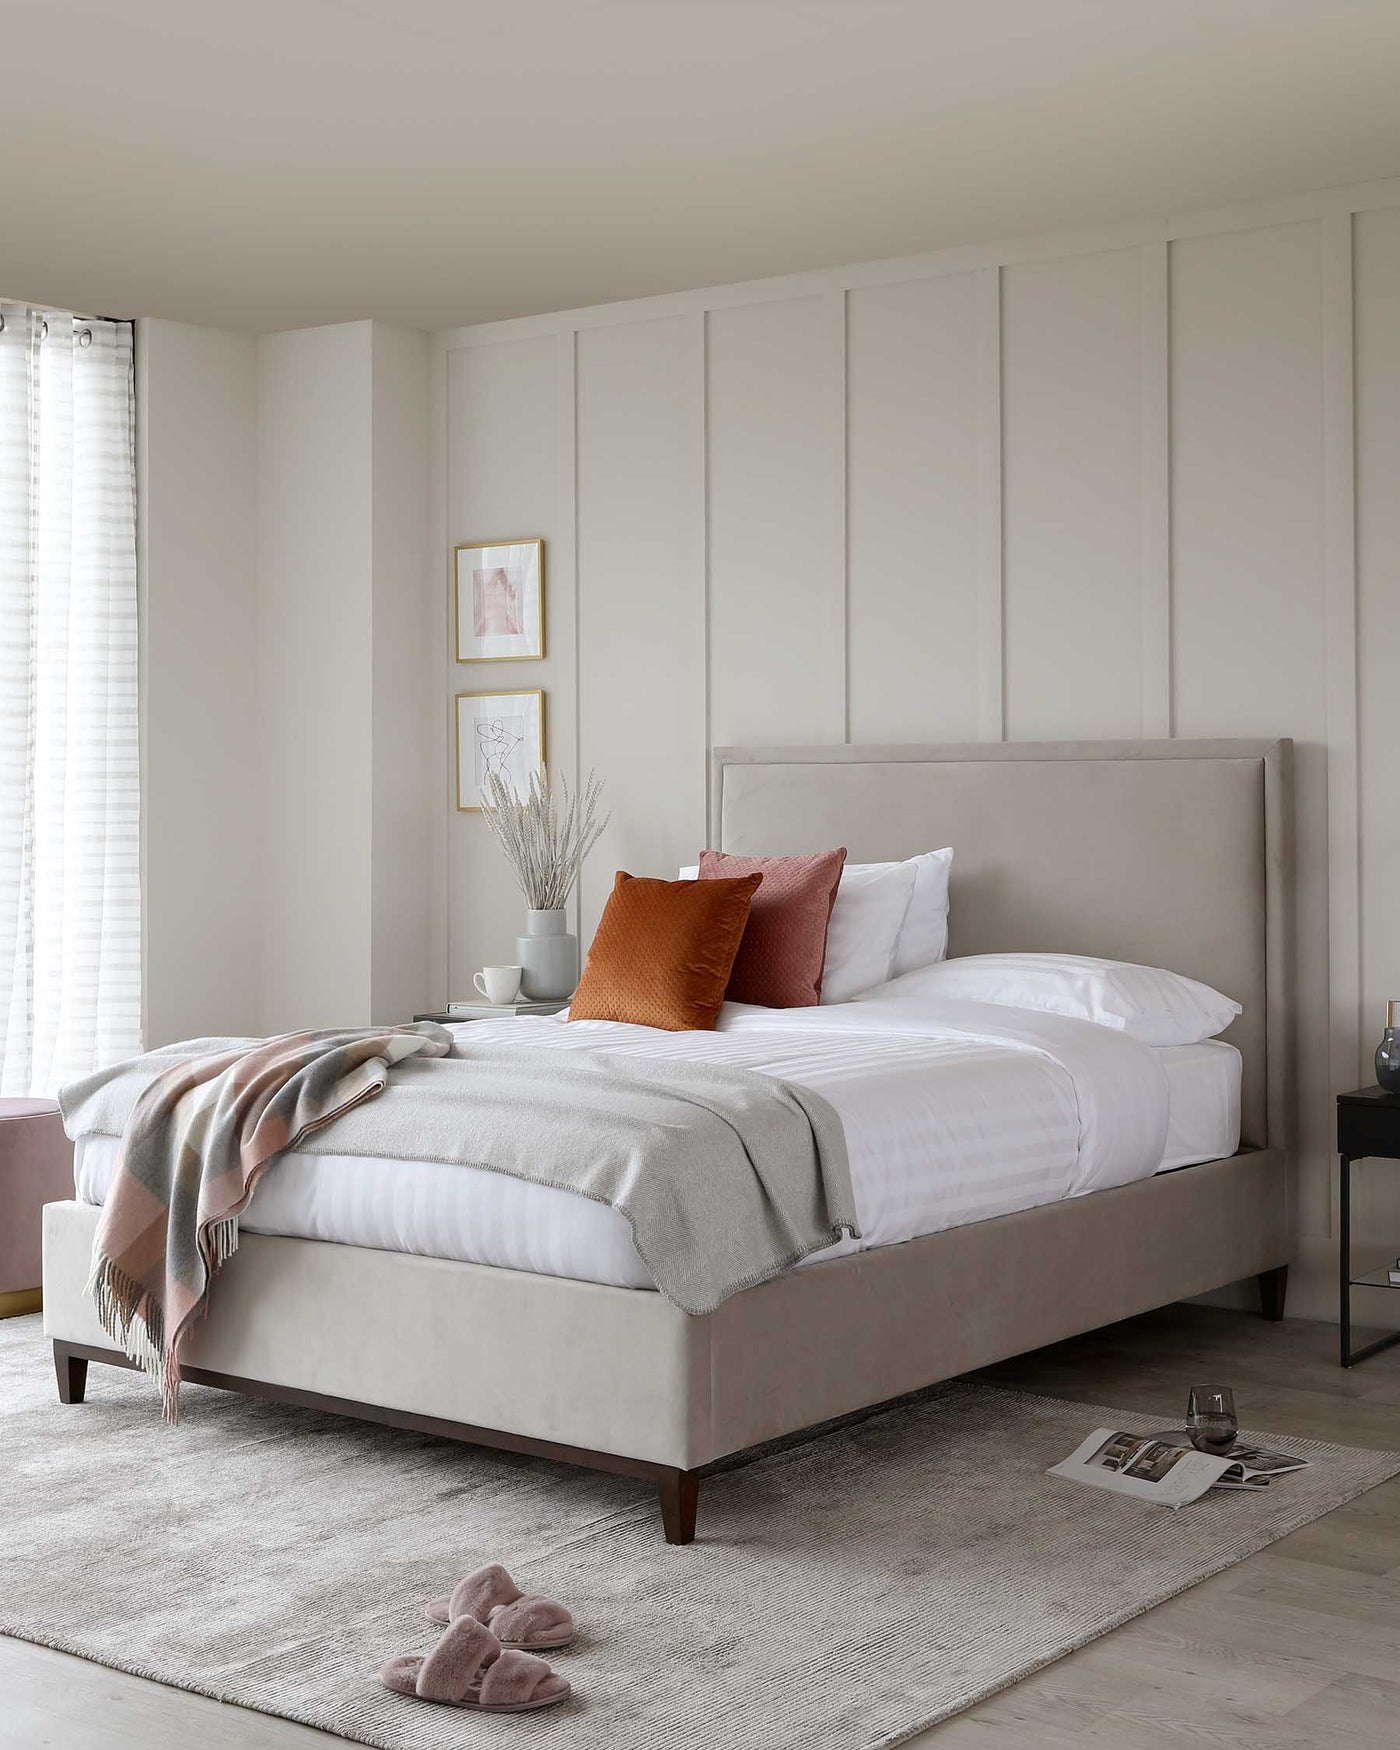 Elegant contemporary bedroom featuring a large upholstered bed with a simple, padded headboard in a neutral tone. The bed is dressed in crisp white linens, complemented by accent pillows in shades of orange. A cosy throw blanket is casually draped at the foot of the bed. The bed is set upon a textured area rug that covers a light wooden floor, providing a warm, inviting atmosphere.